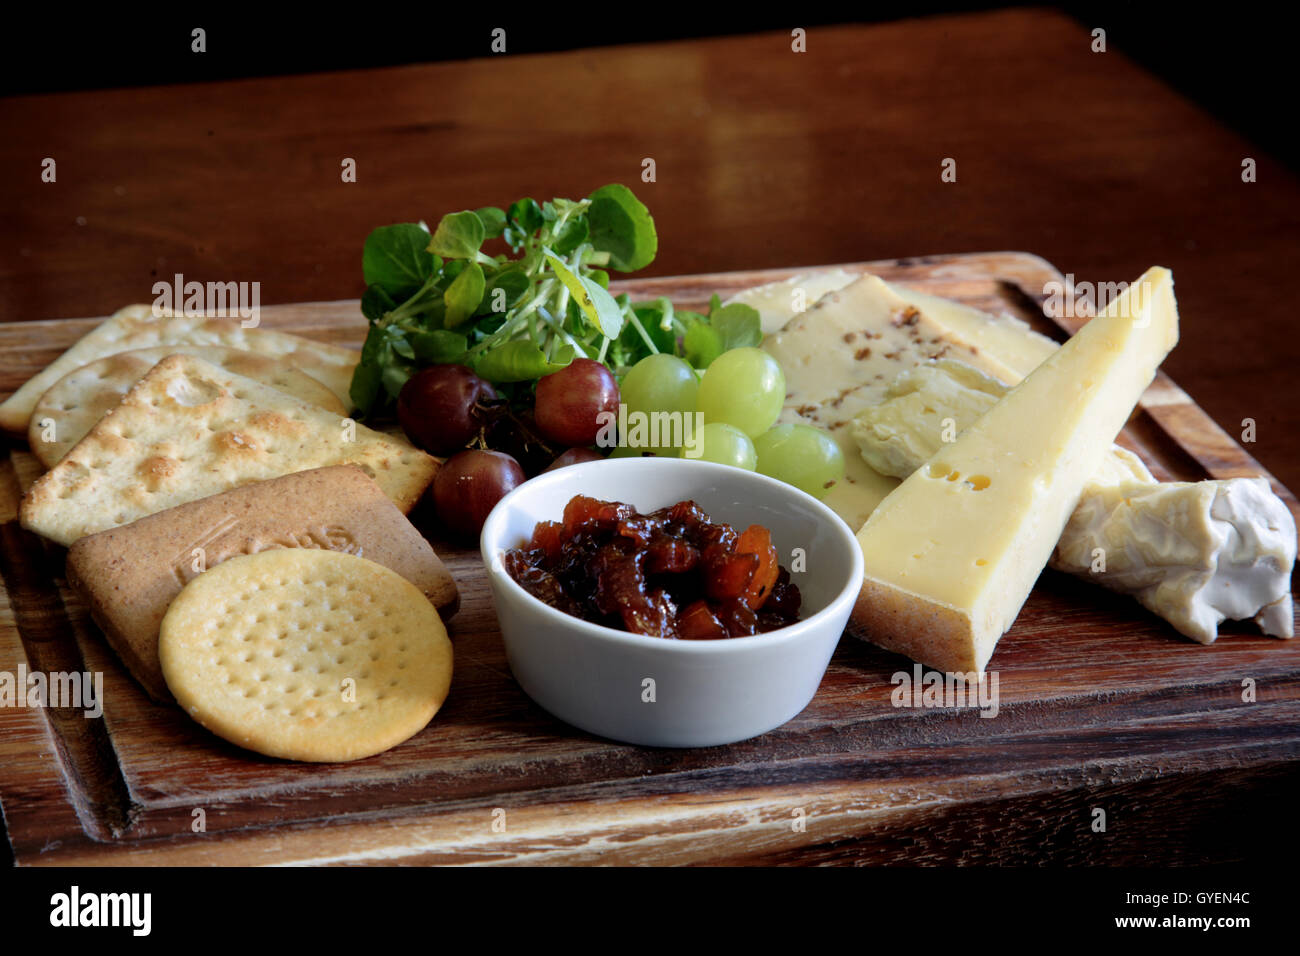 A cheese ploughmans with chutney, biscuits and grapes Stock Photo